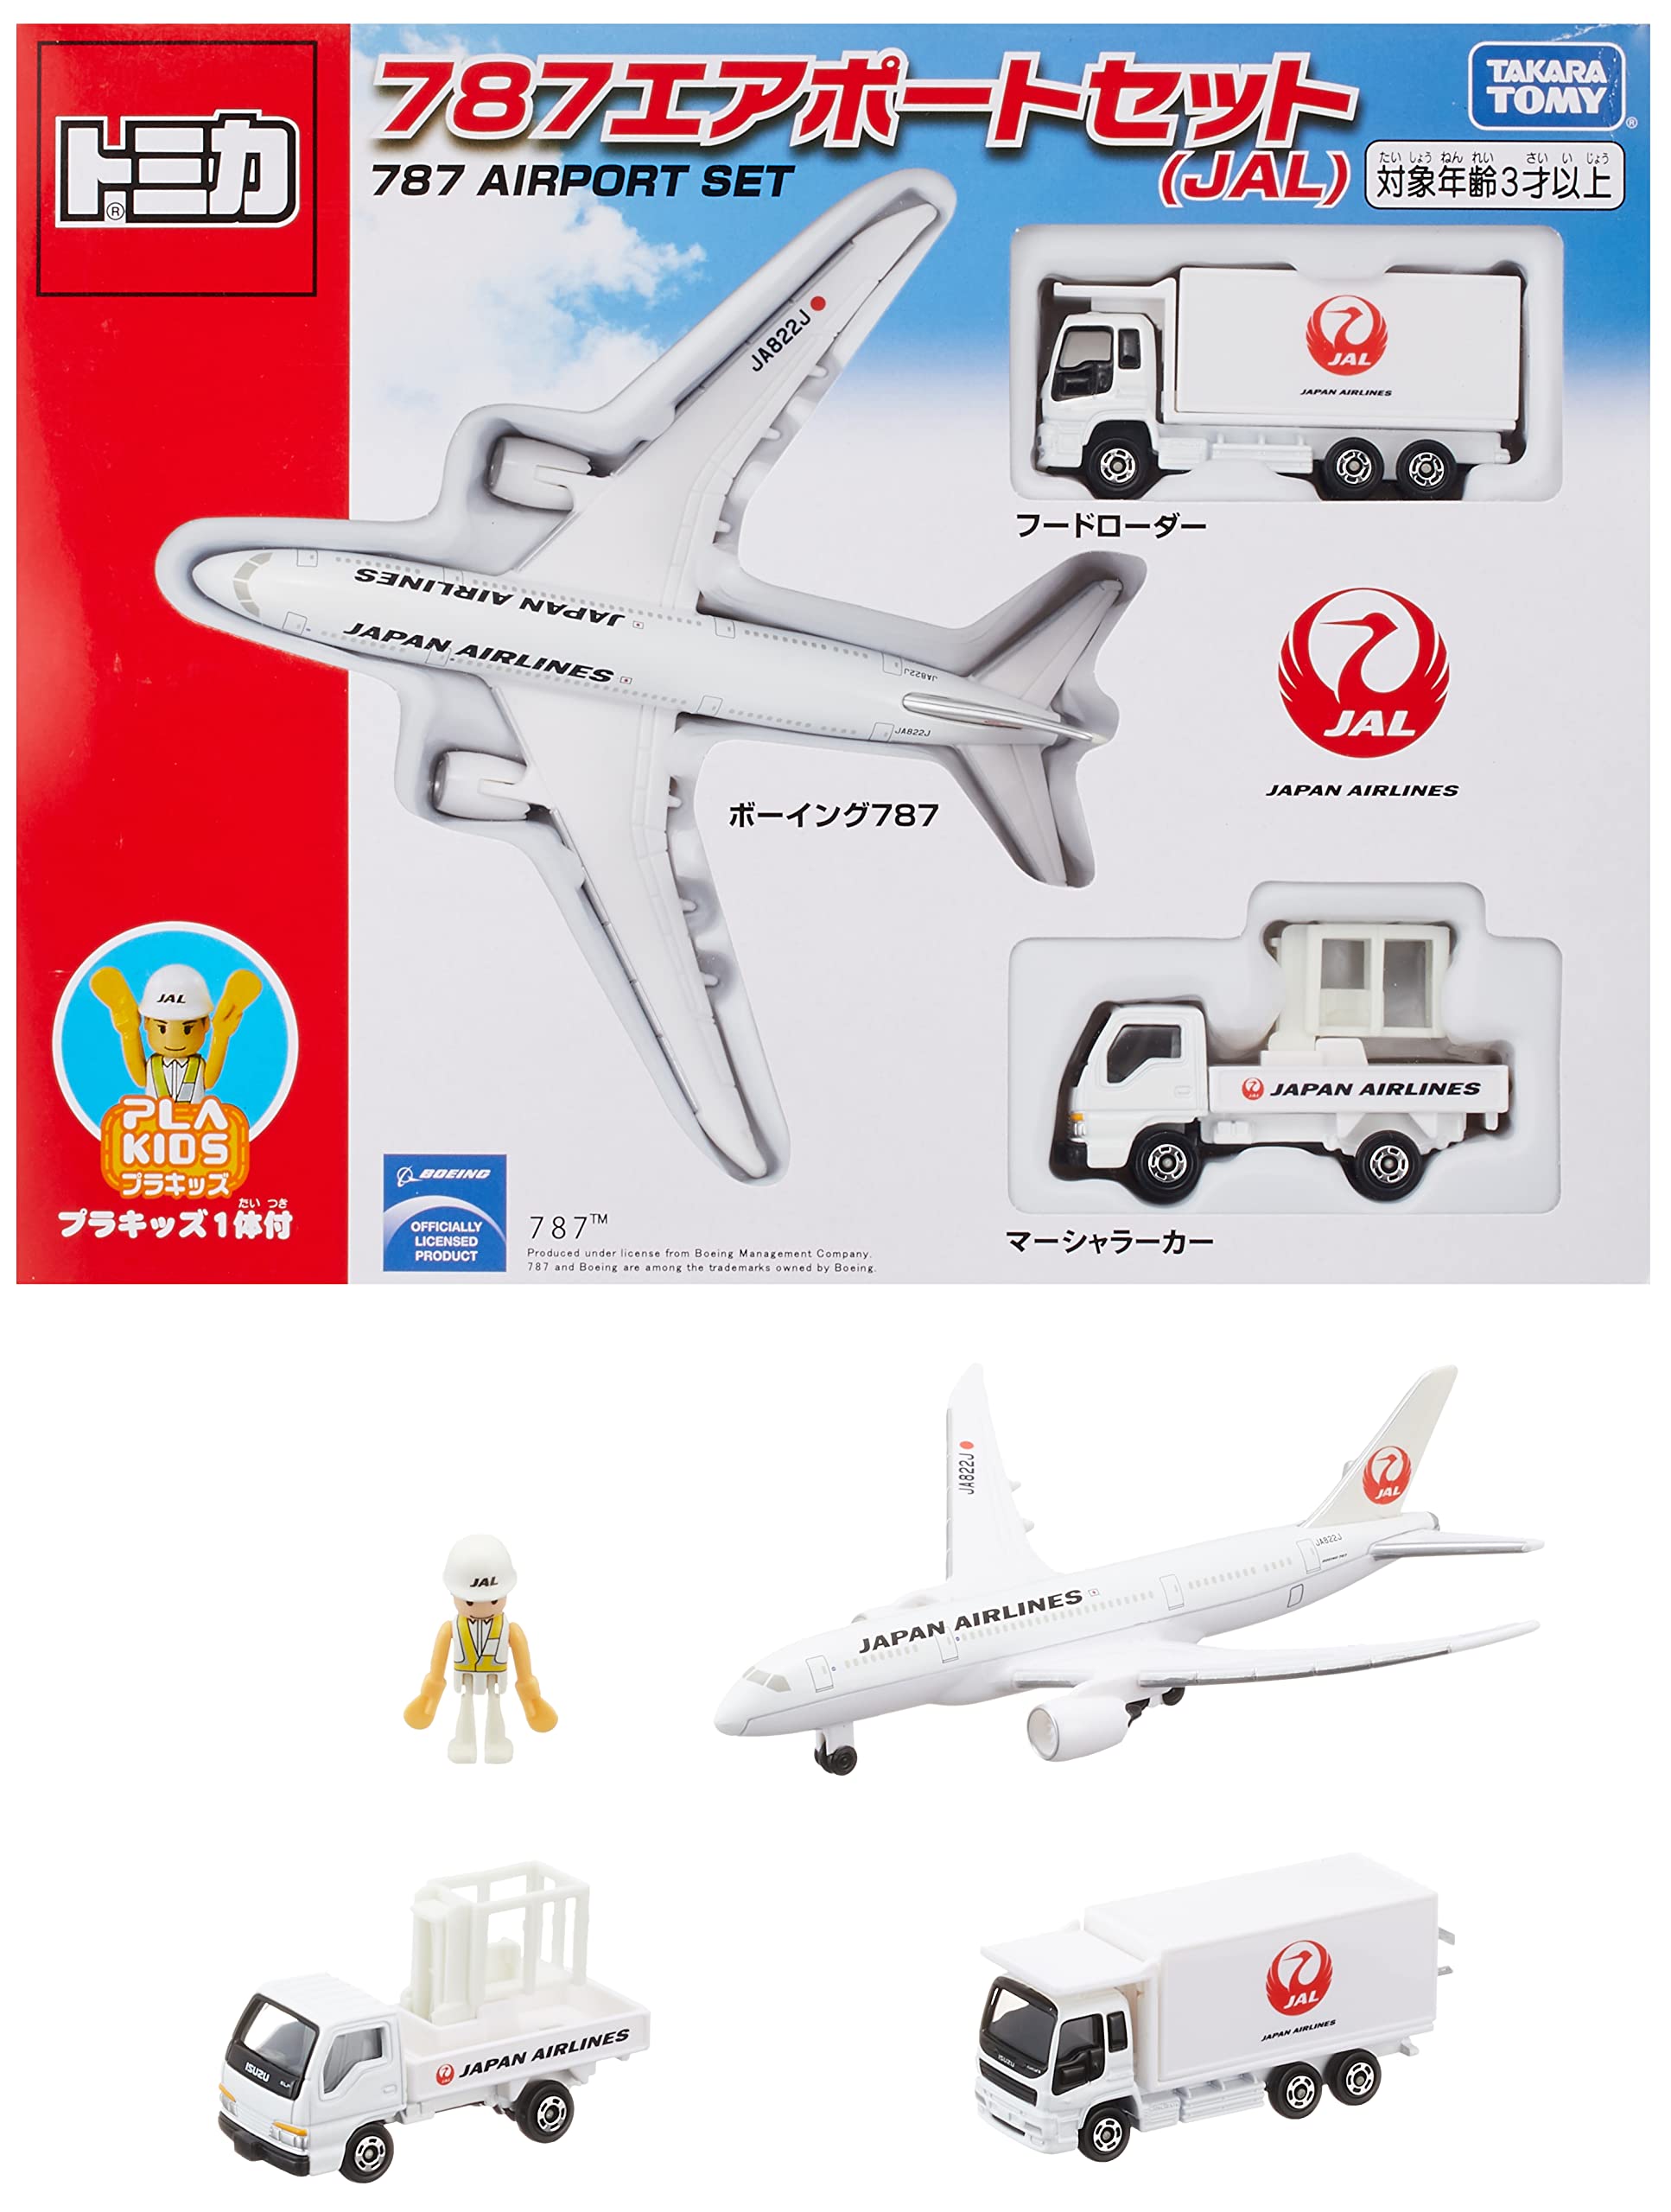 Tomy Tomica - Boeing 787 Airport Set (JAL)